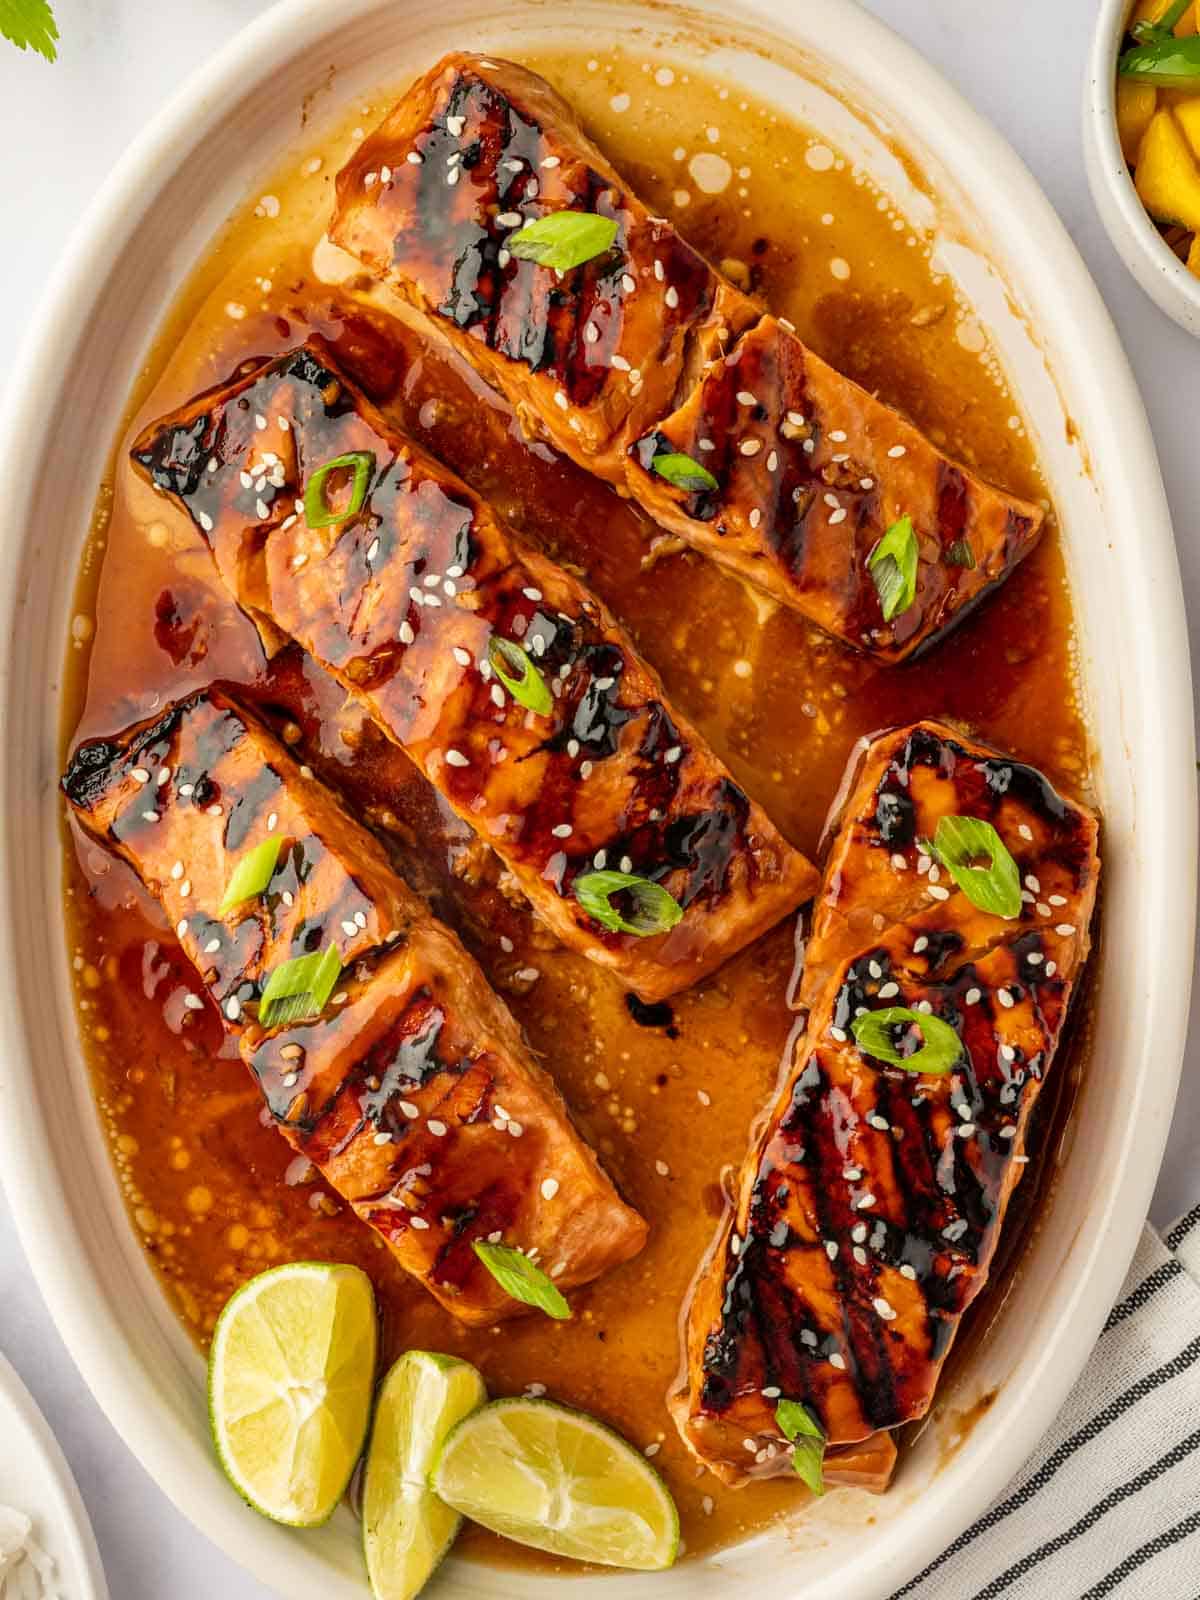 Grilled salmon teriyaki is garnished with green onions and sesame seeds.